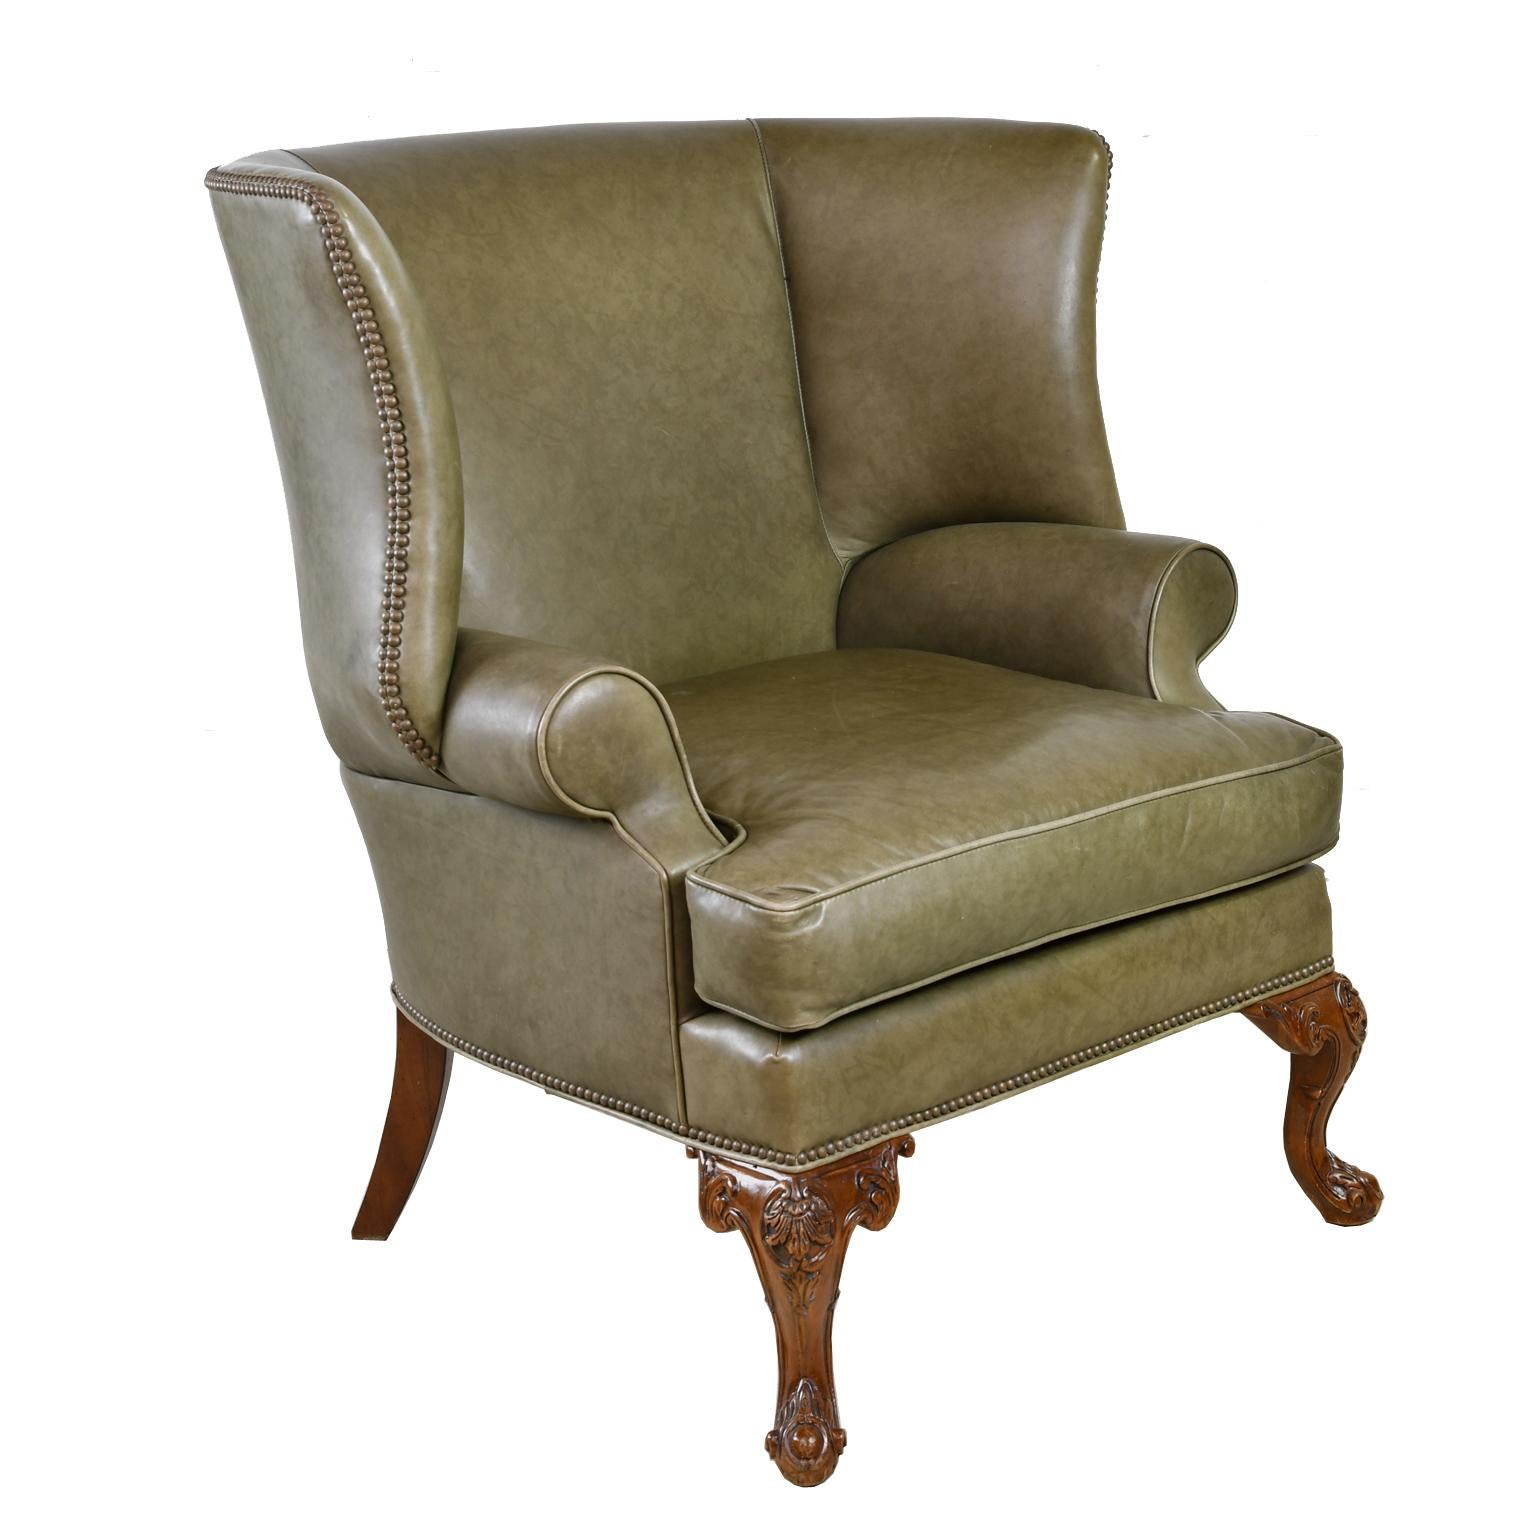 Contemporary Large Vintage Wingback Armchair with Sage-Green Leather Upholstery